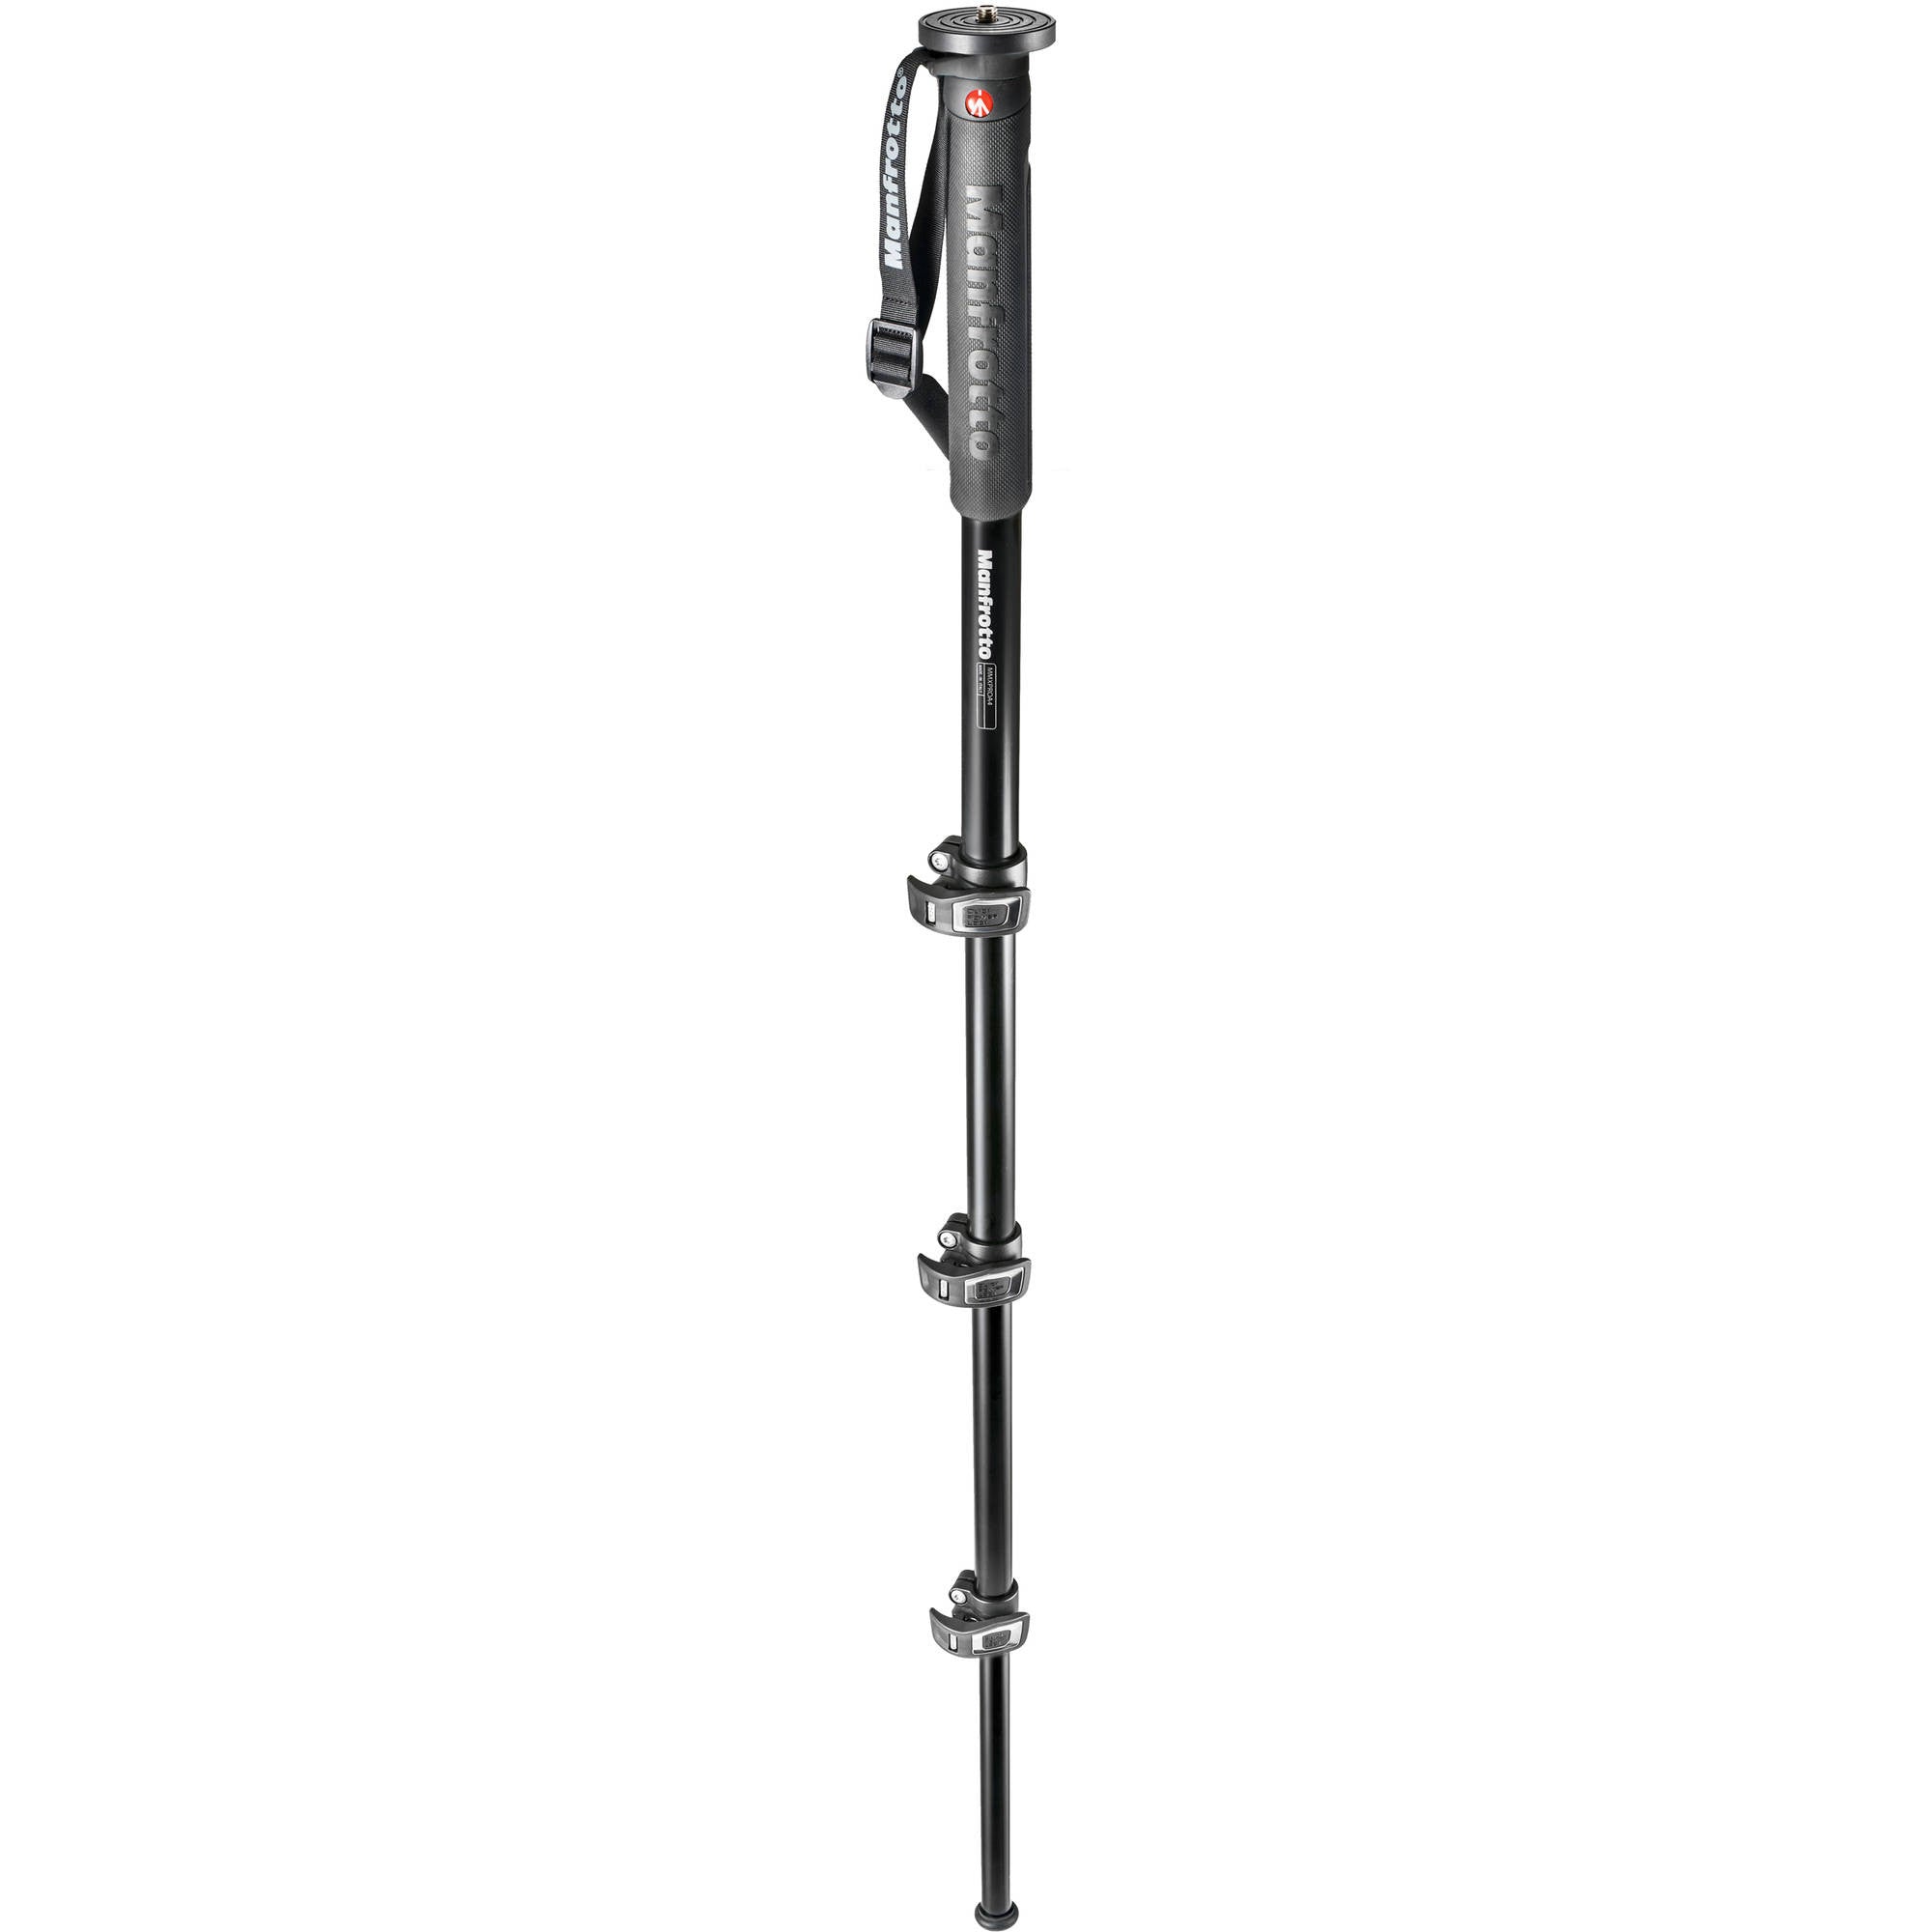 Manfrotto MMXPROA4US 4-Section Aluminum Monopod, discontinued, Manfrotto - Pictureline 